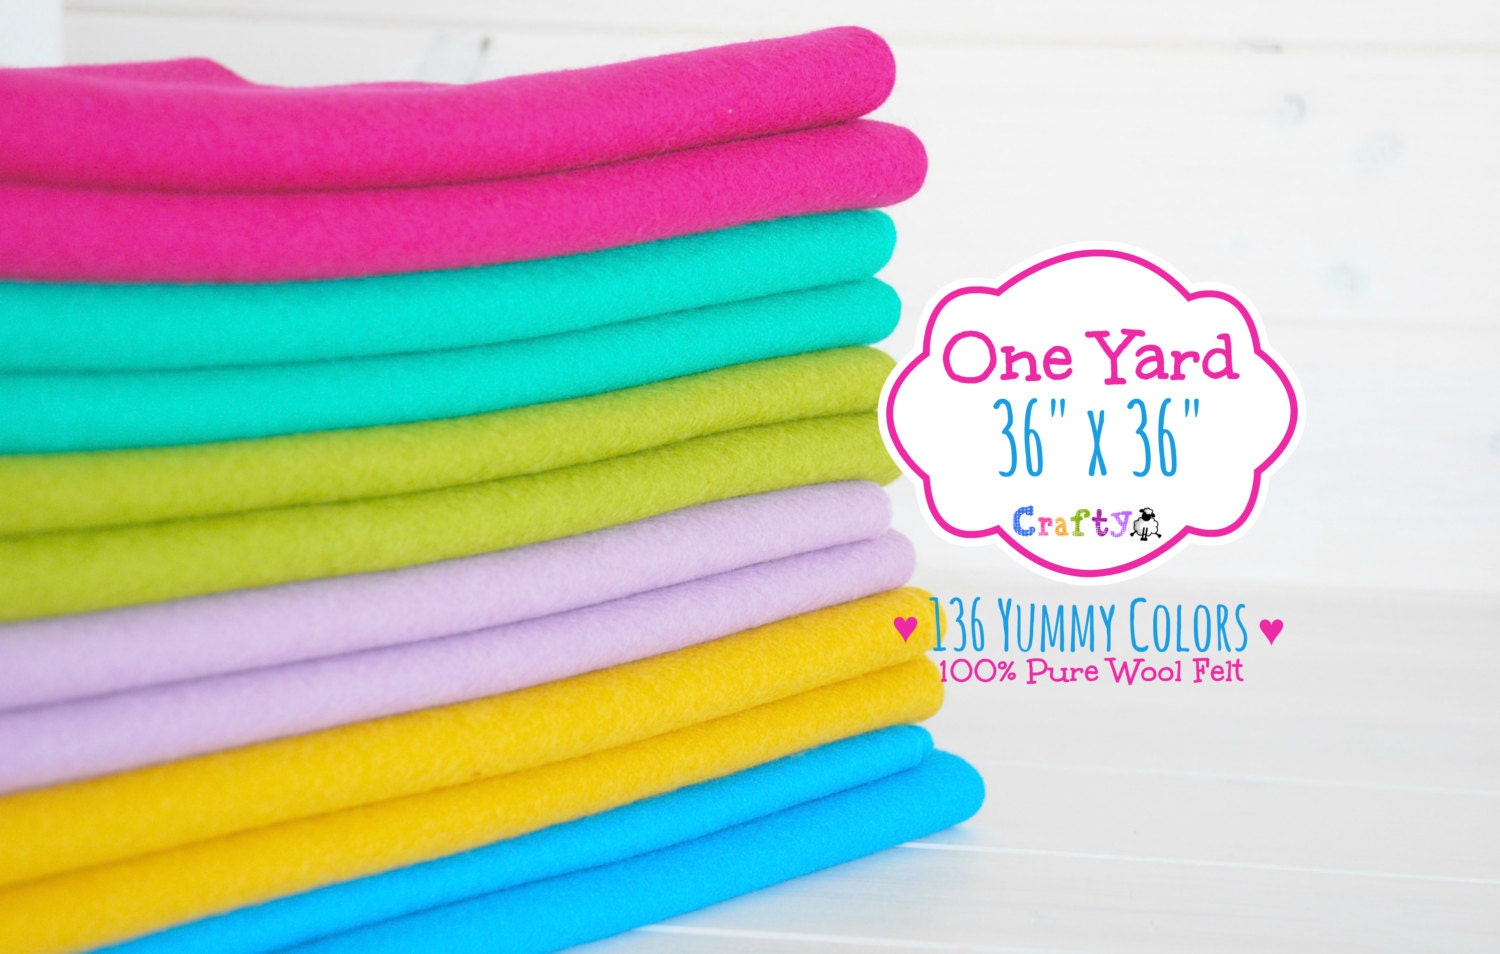 Premium Felt by the Yard 36 Wide 25 Color Options Soft Wool-like 1.2mm  Thick Works With Cutters 